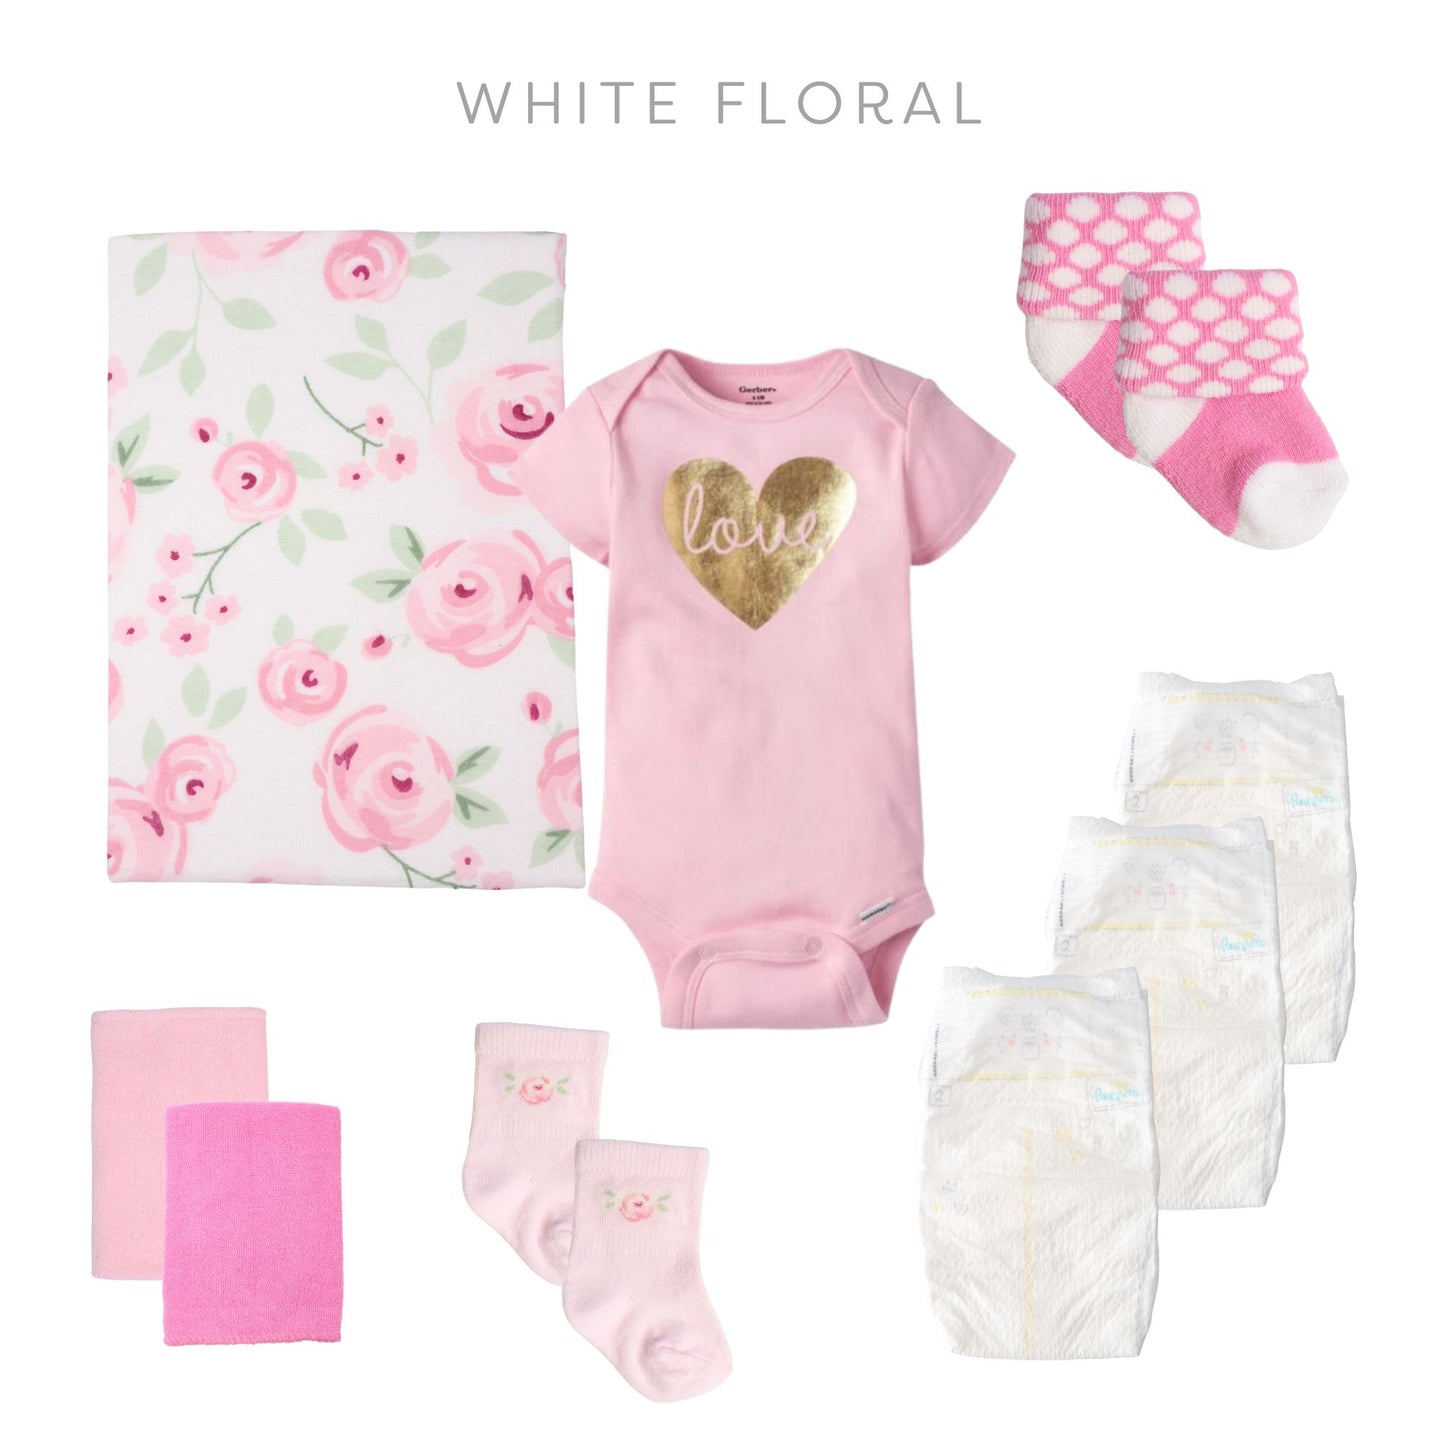 white floral baby bouquet clothing